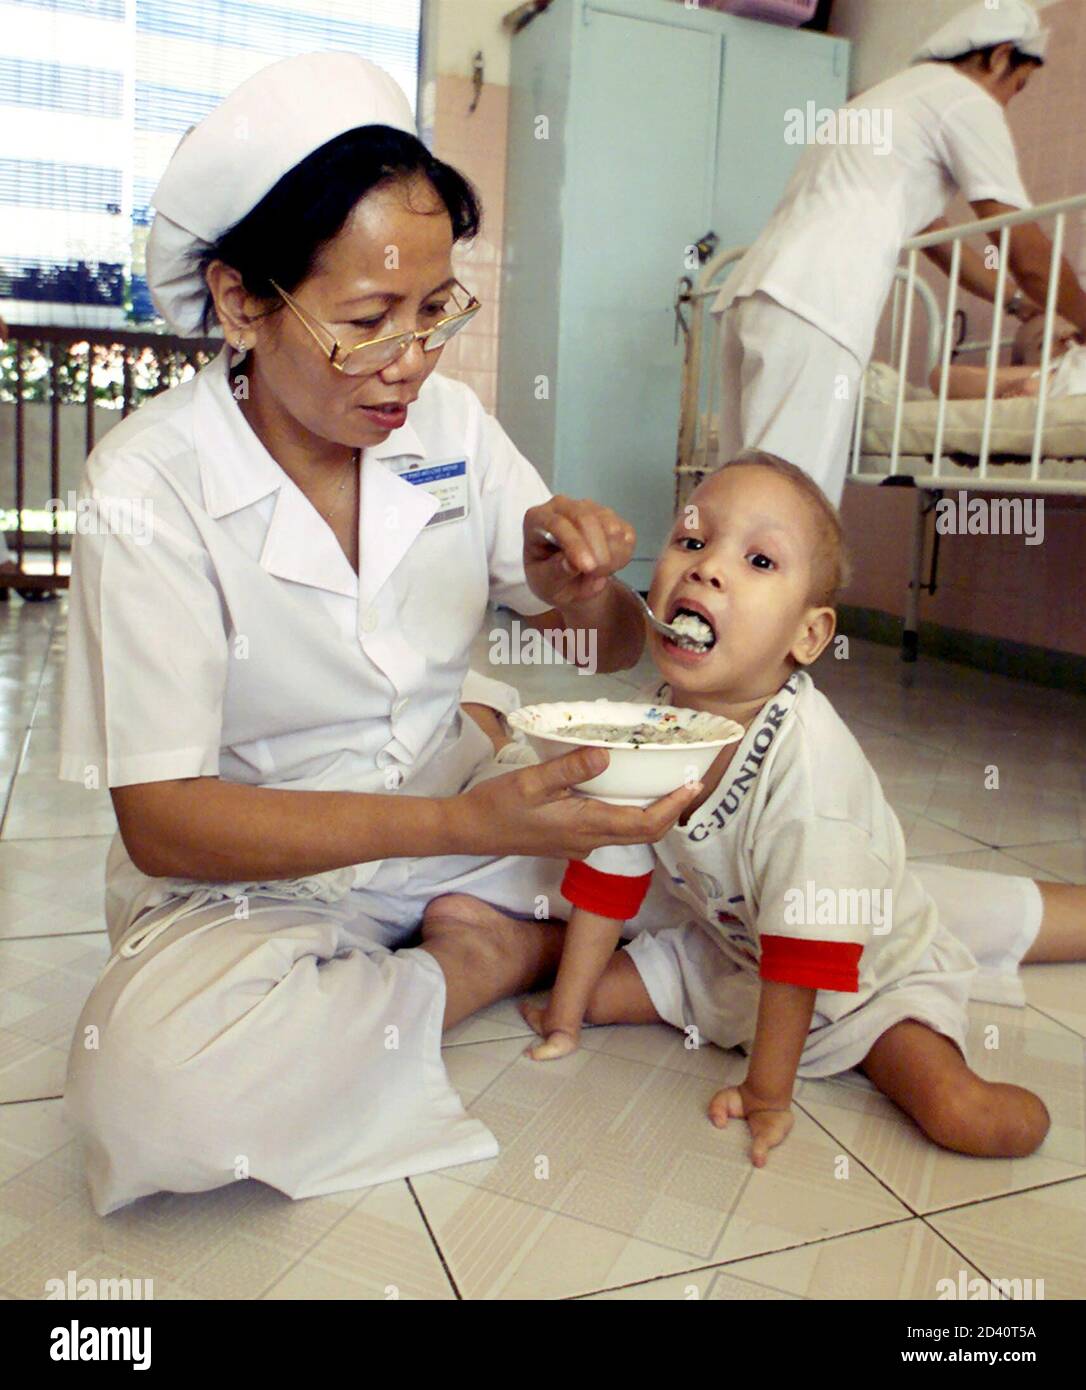 A Nurse Feeds A Child With Birth Defects That Resulted From The Parents Exposure To The Toxic Defoliant Agent Orange At The Tu Du Women S Hospital In Ho Chi Minh City November